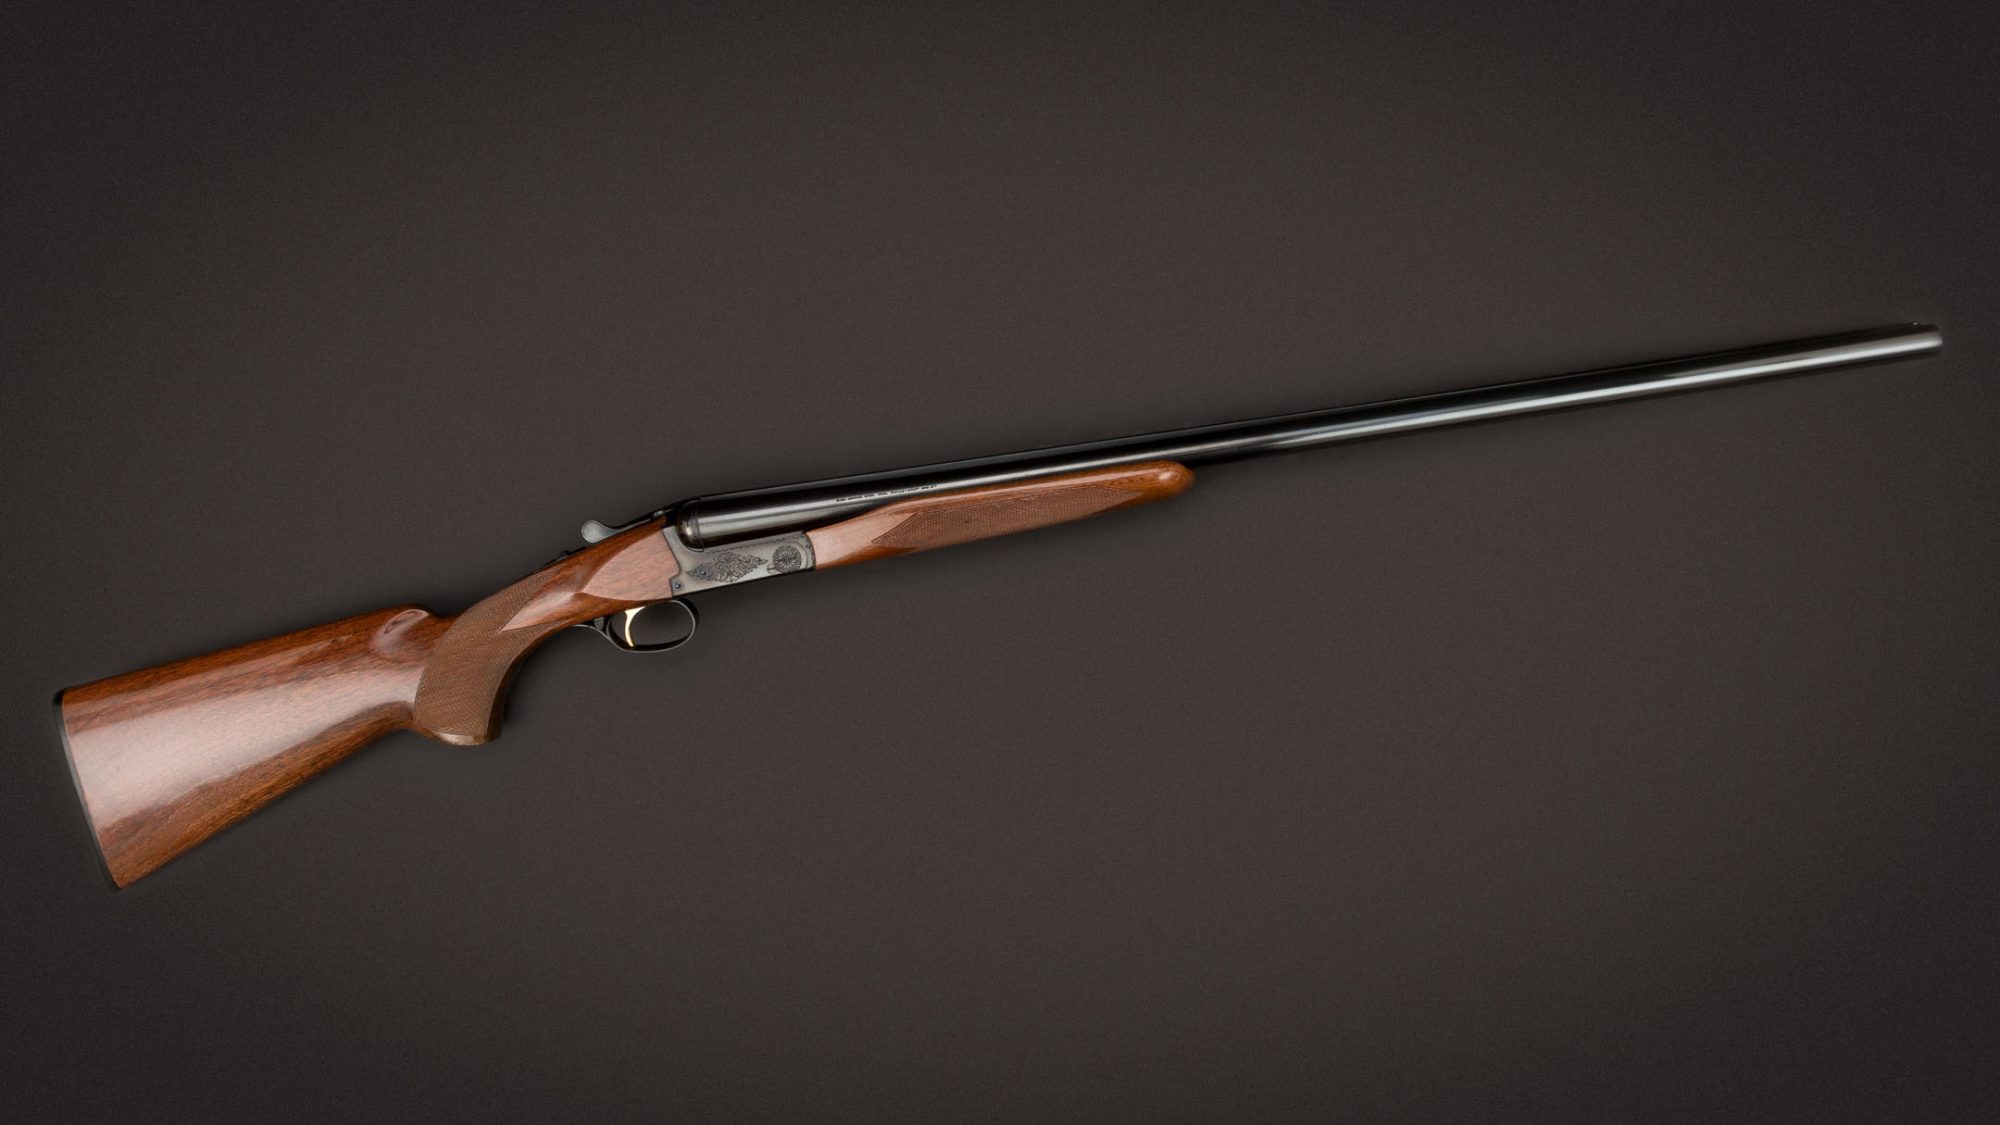 Browning BSS 12ga side-by-side shotgun, for sale by Turnbull Restoration of Bloomfield, NY